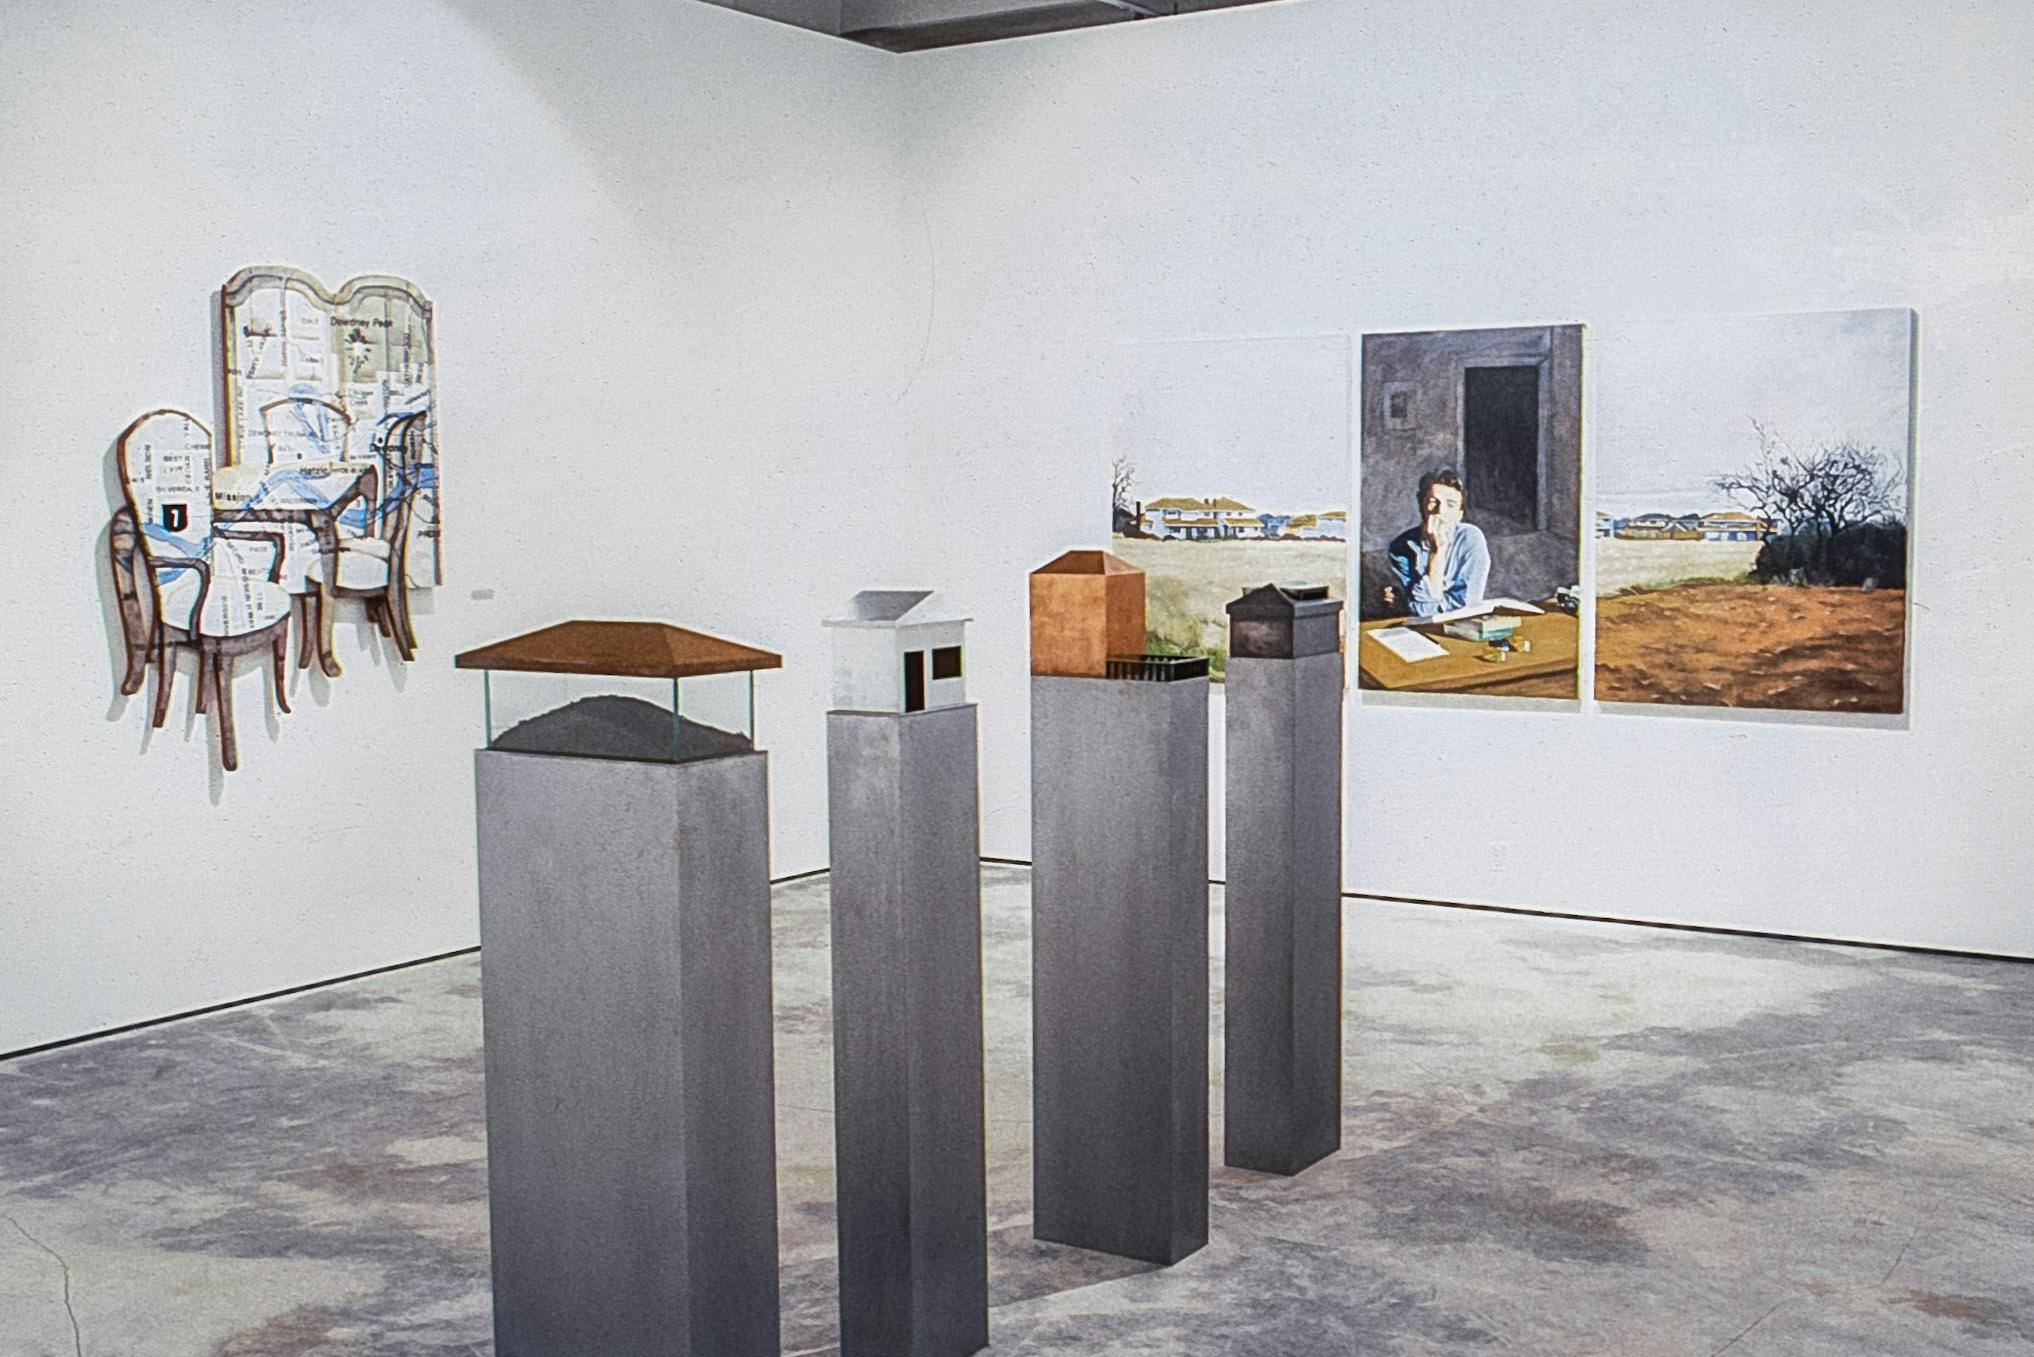 A gallery with several artworks. On one wall there are 3 paintings, on the other there is a painting collage. IN the centre, 4 grey plinths show small metal house-like forms on them.